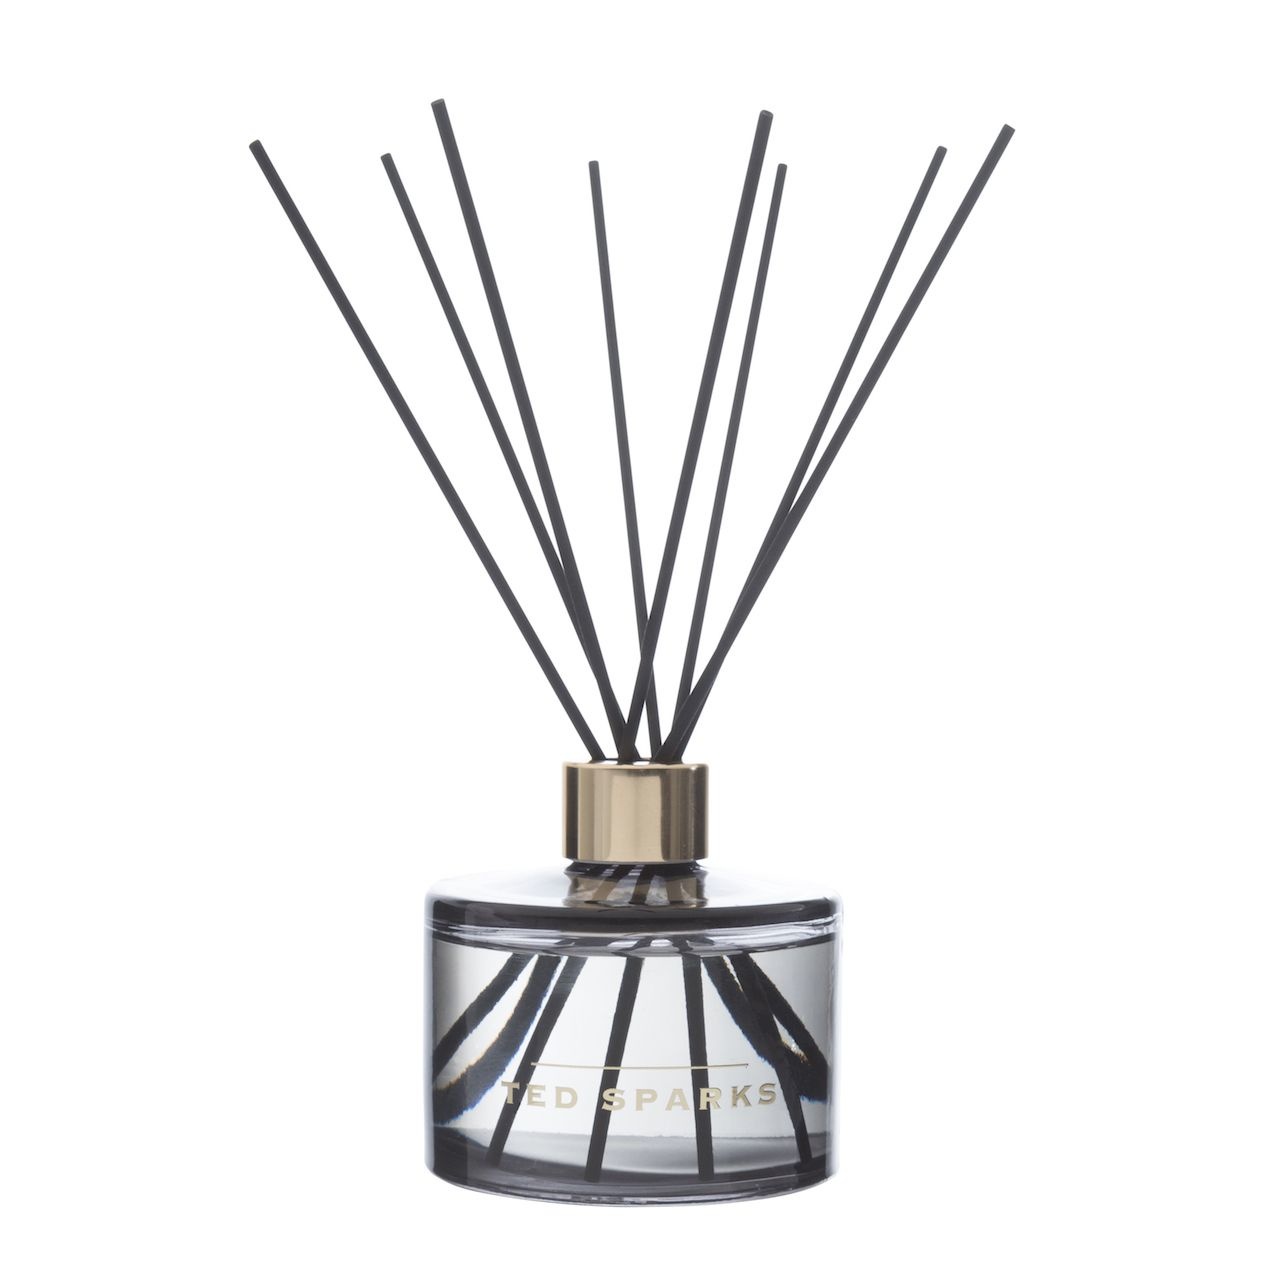 Ted Sparks - Geurstokjes Diffuser - Bamboo & Peony